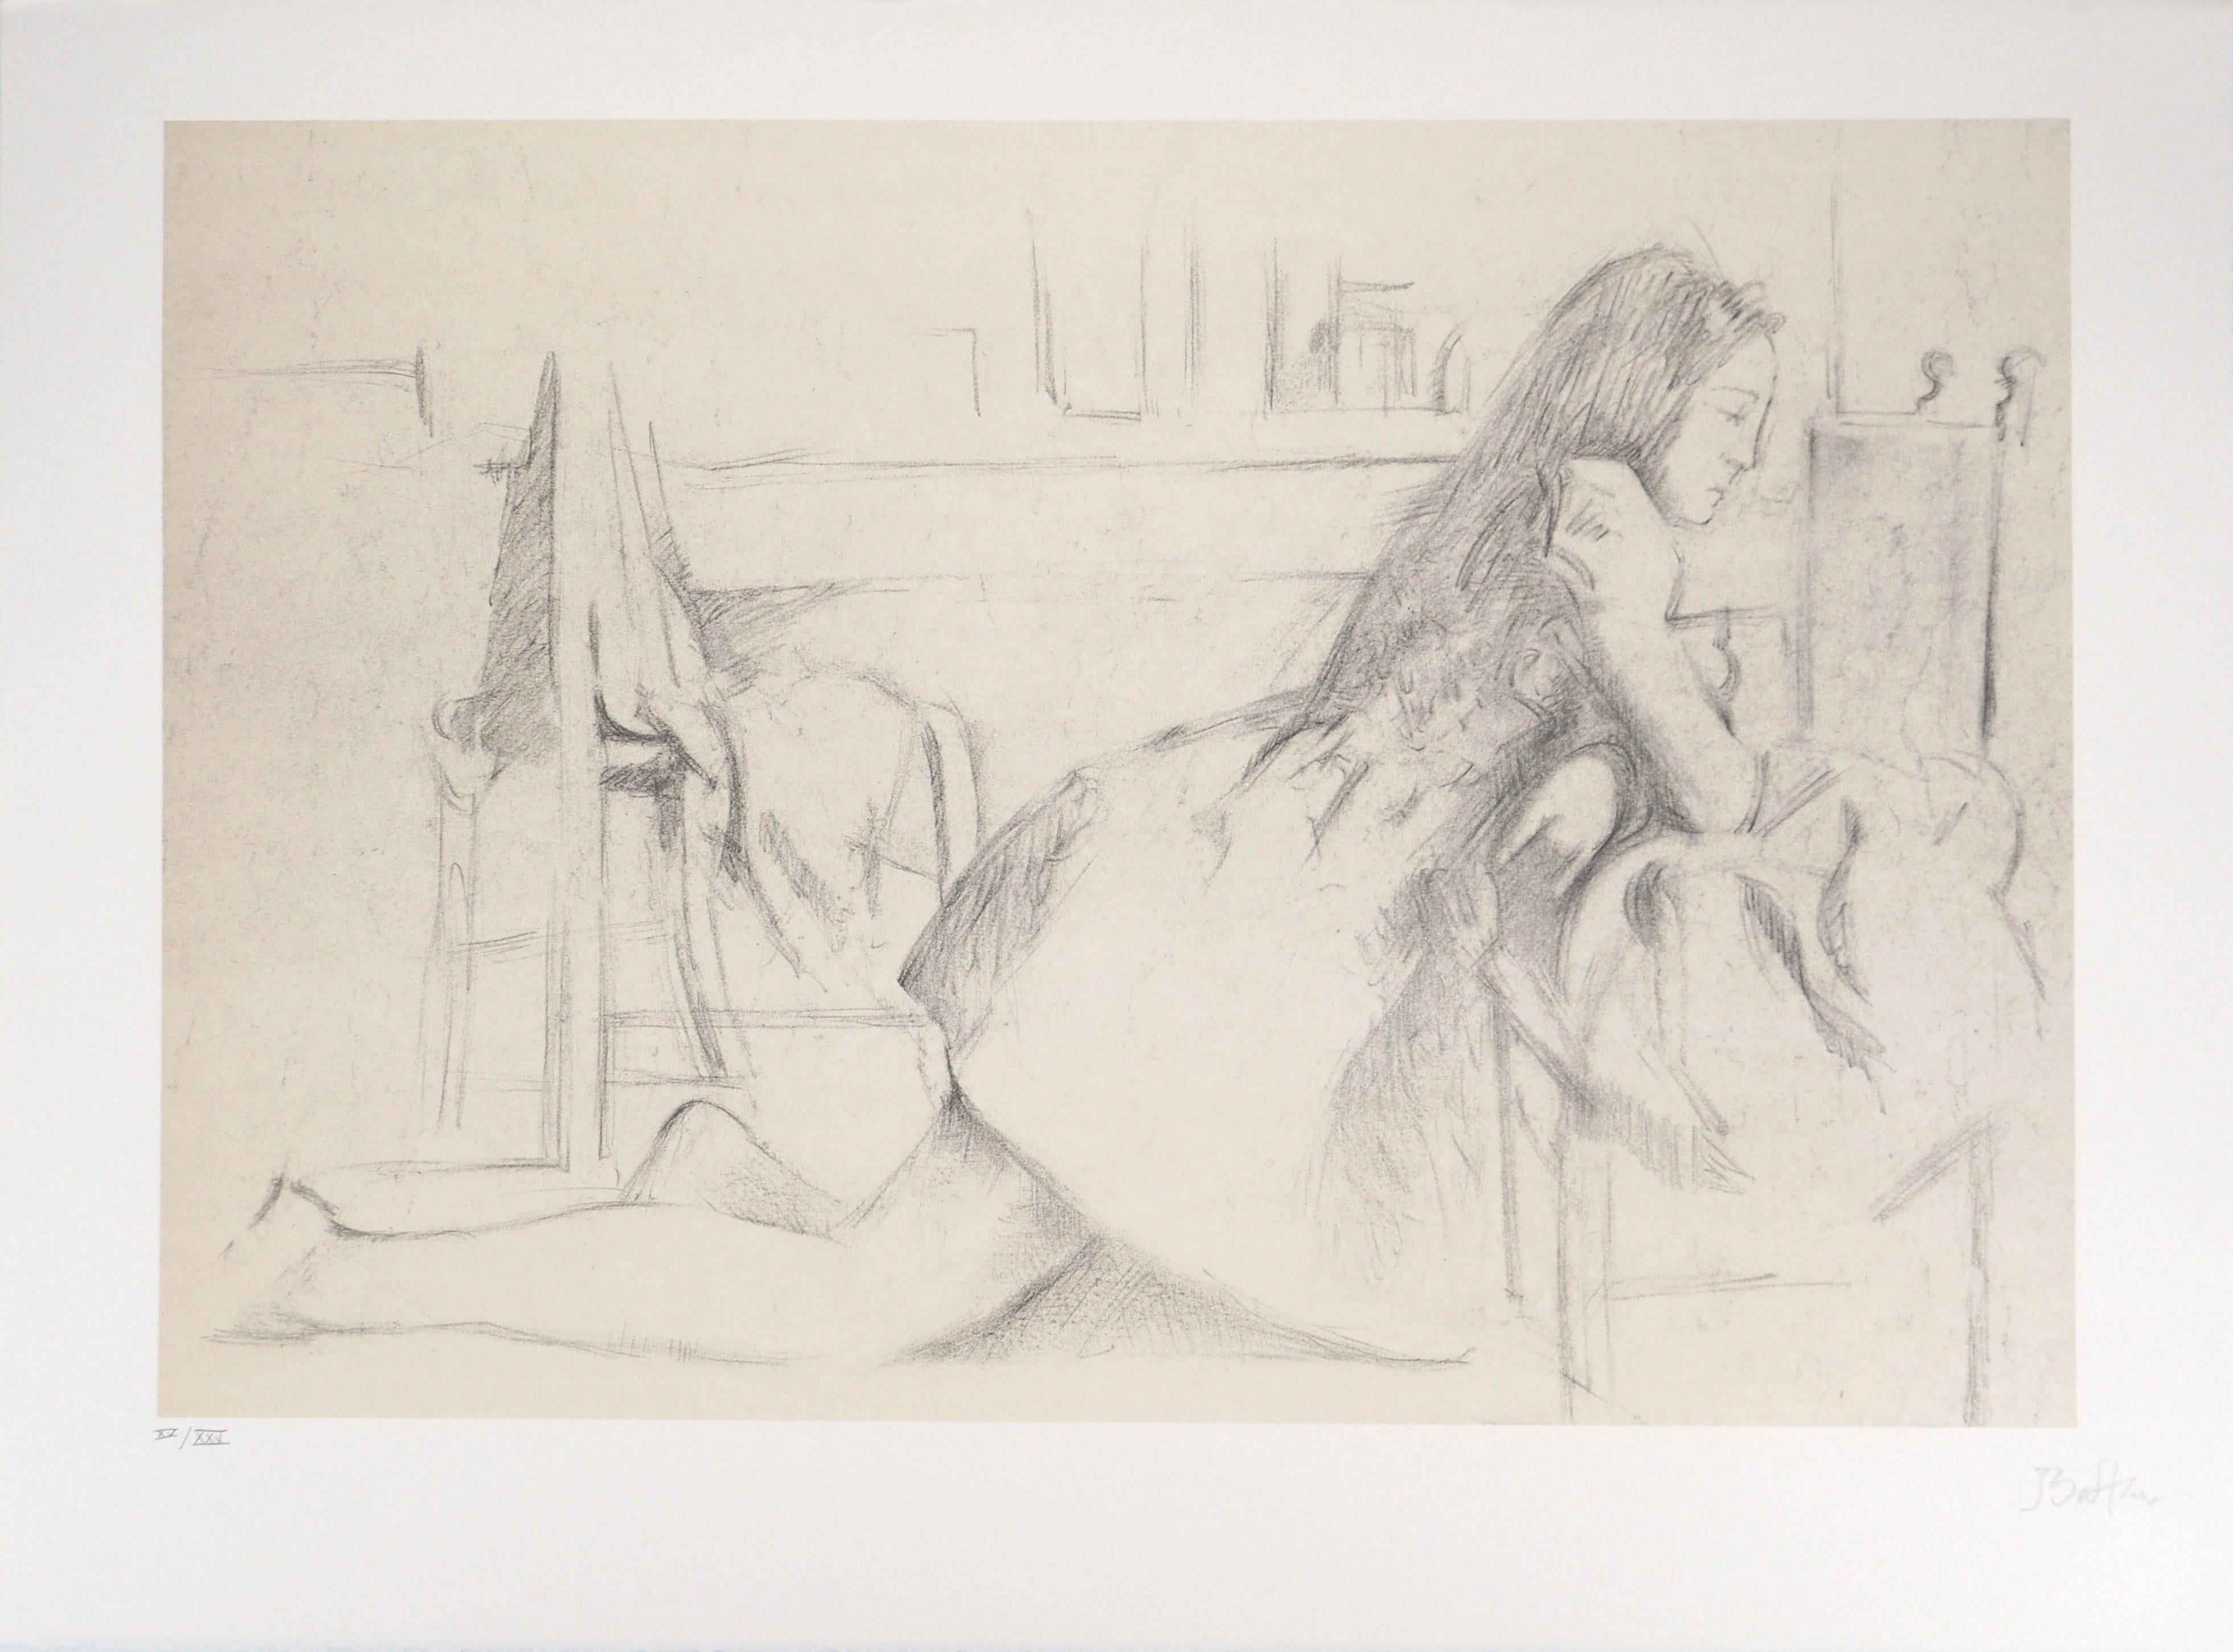 Young Girl on her Knees - Original handsigned lithograph - Print by Balthus